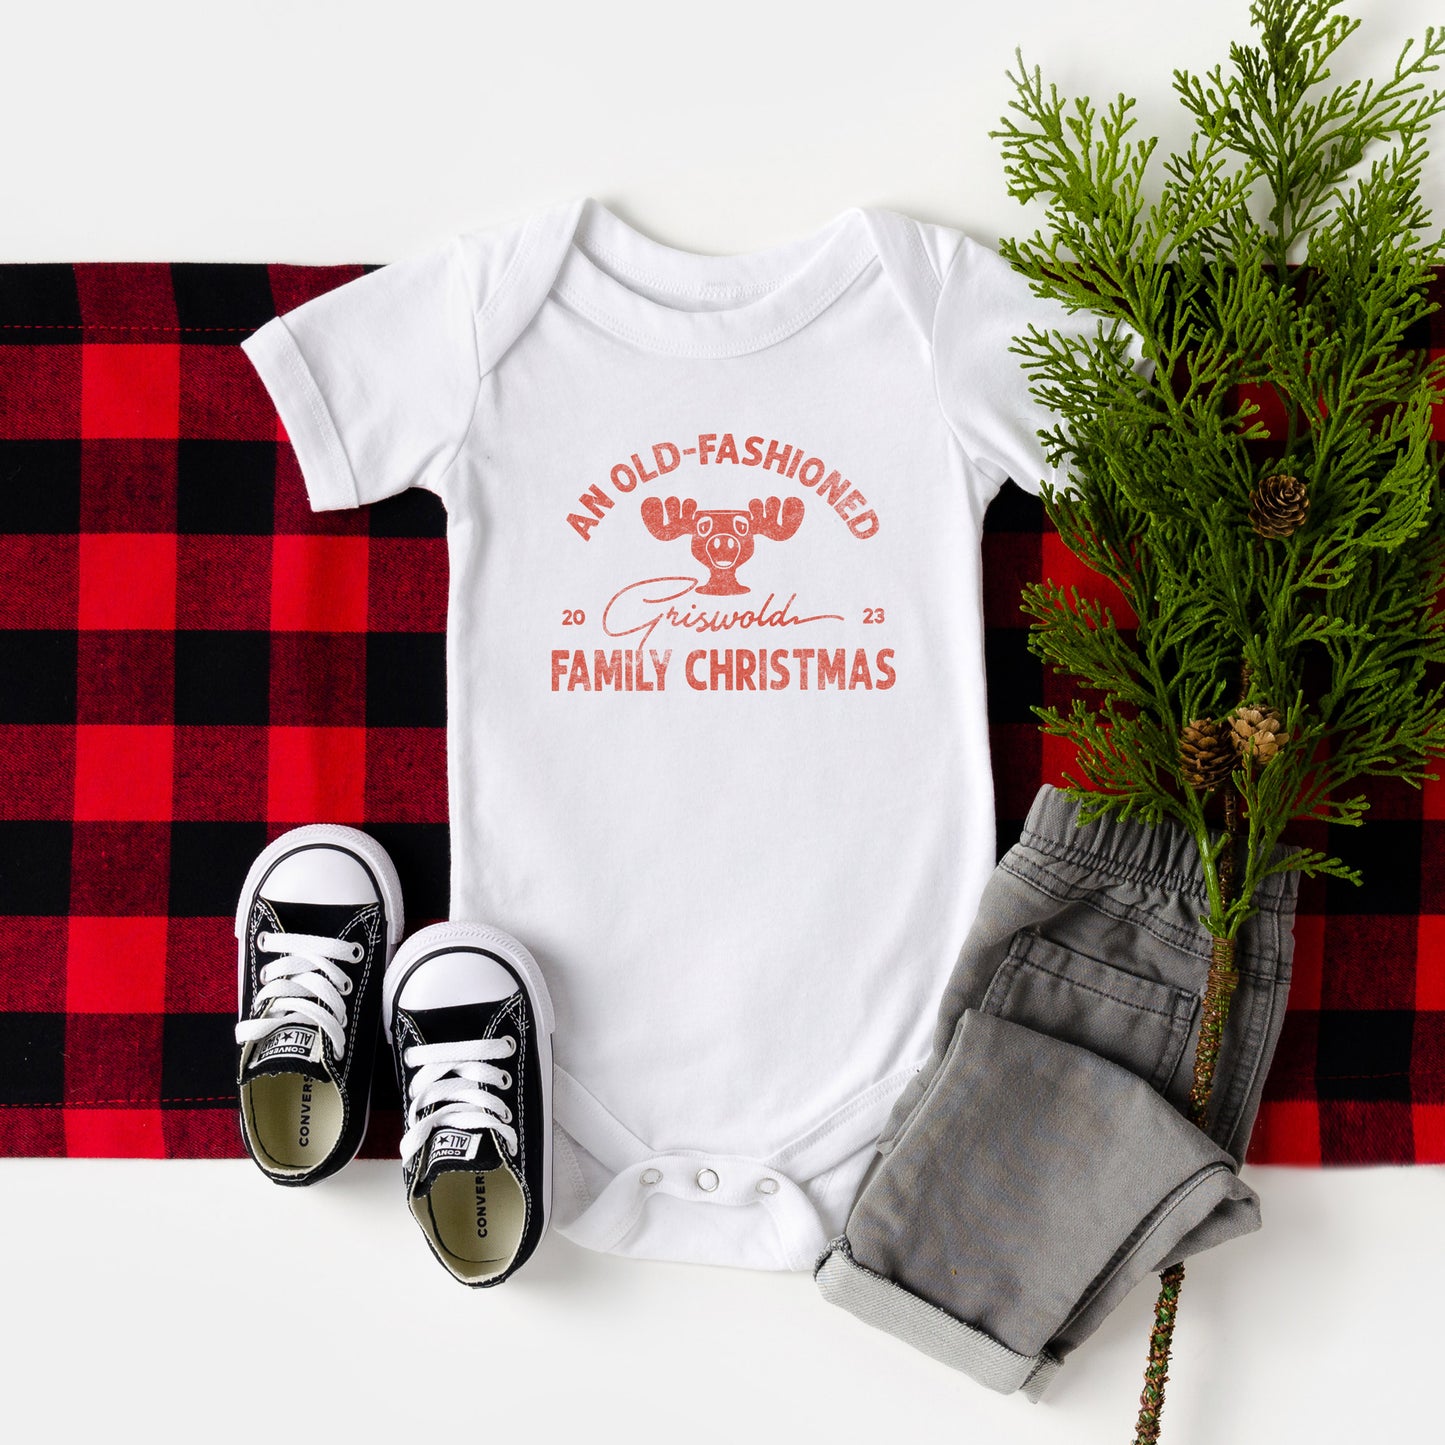 an old-fashioned Griswold family christmas baby onesie in white